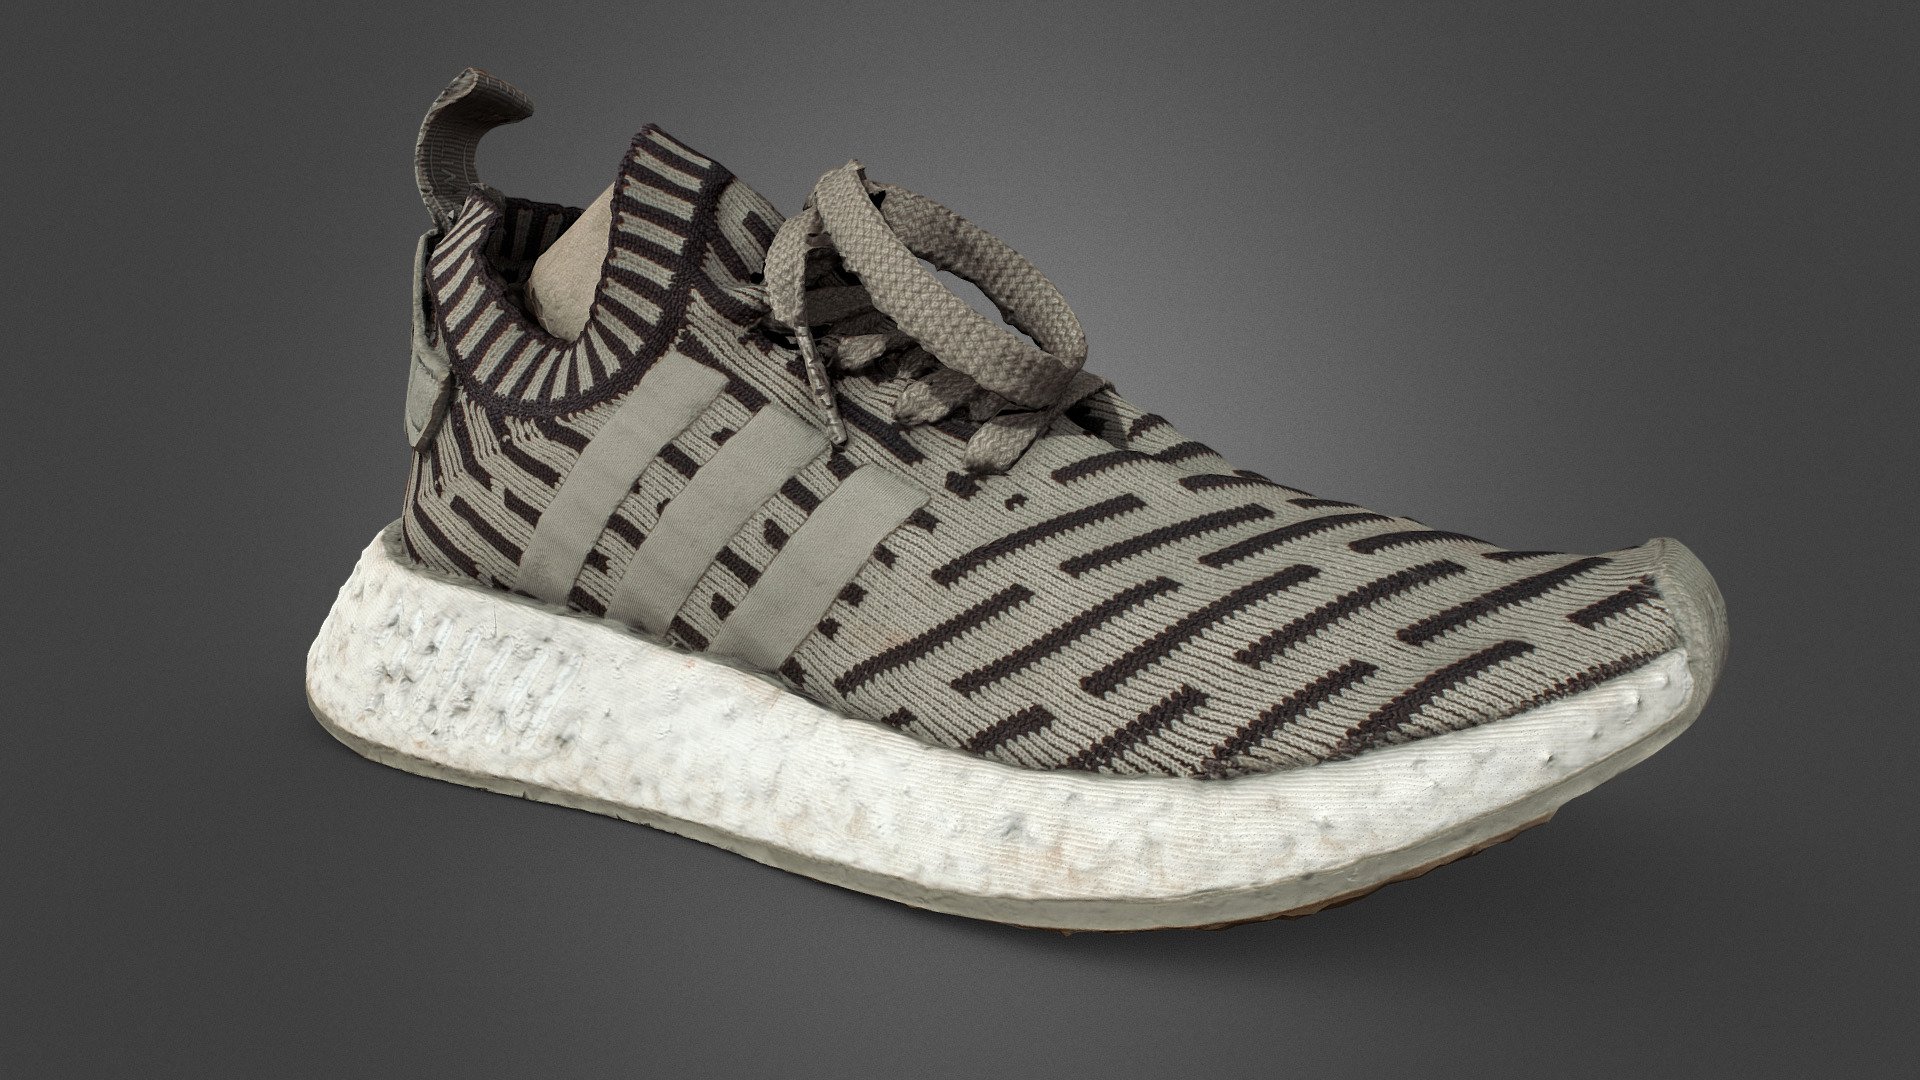 Imposible sección empezar Adidas NMD - Buy Royalty Free 3D model by 3DSCANFR (sdrn) (@3DSCANFR)  [c1fe3b7]